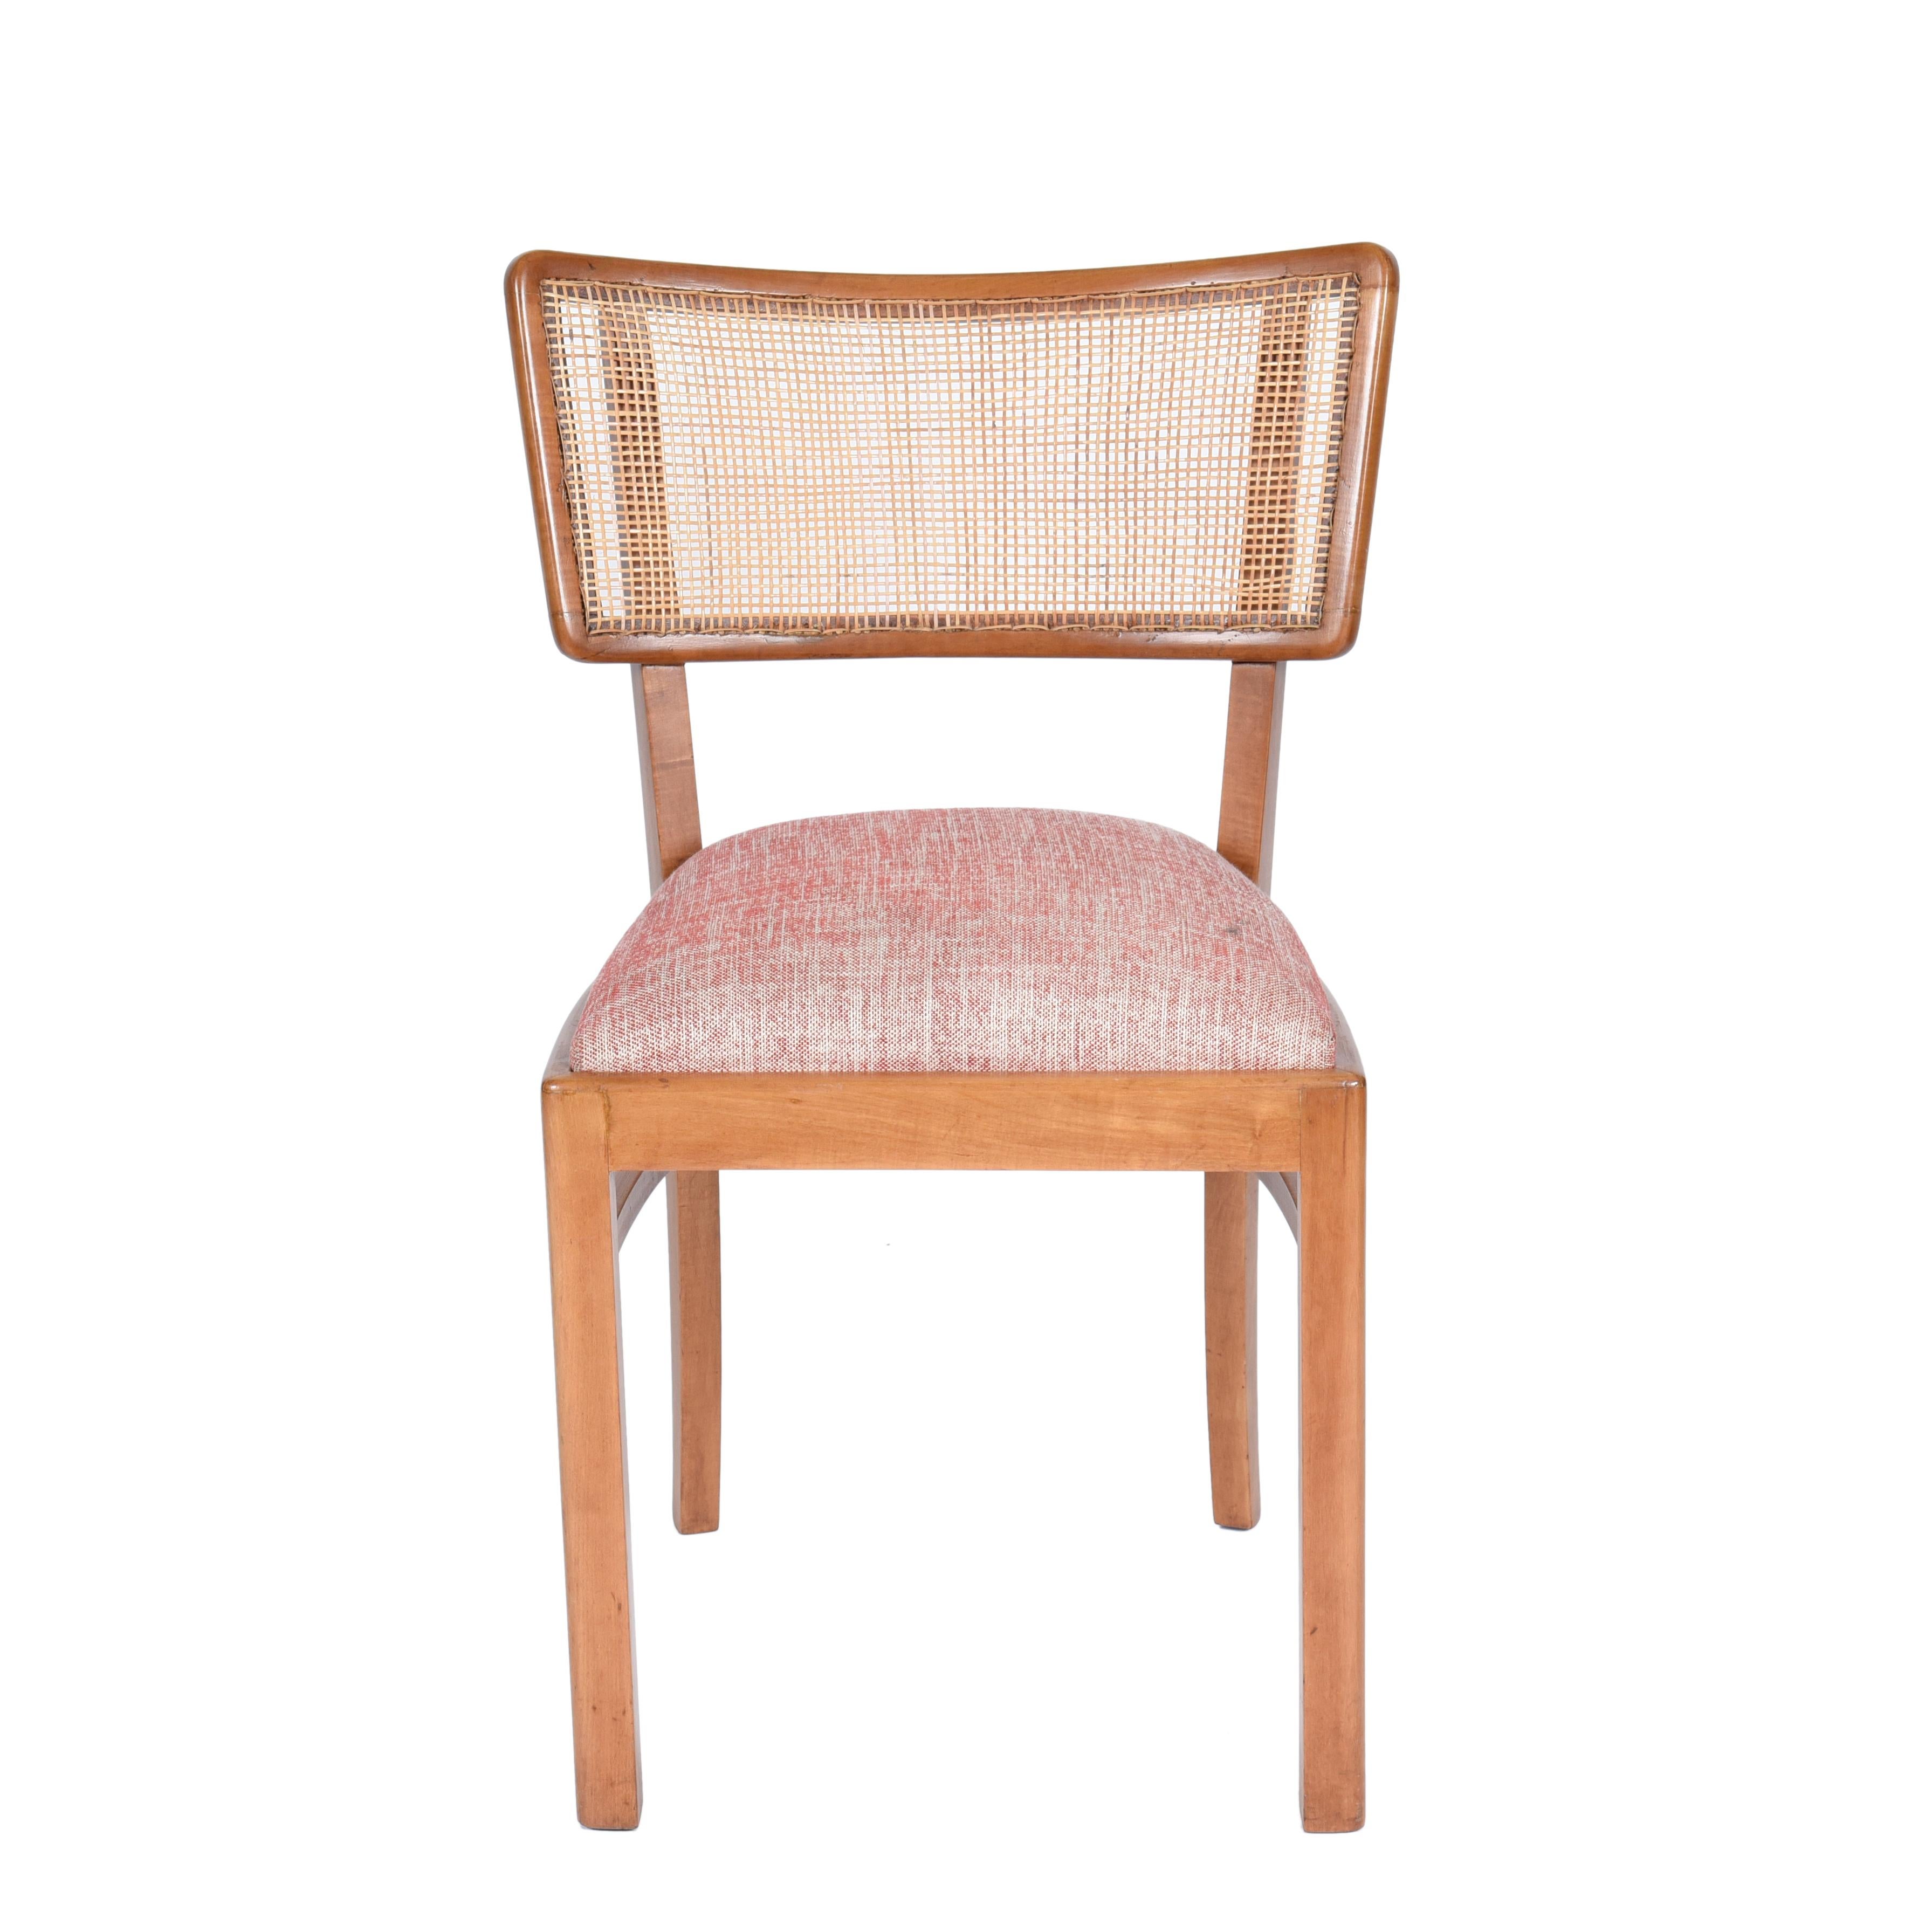 Midcentury Brazilian Chair in Ivory Wood and Straw, 1960s For Sale